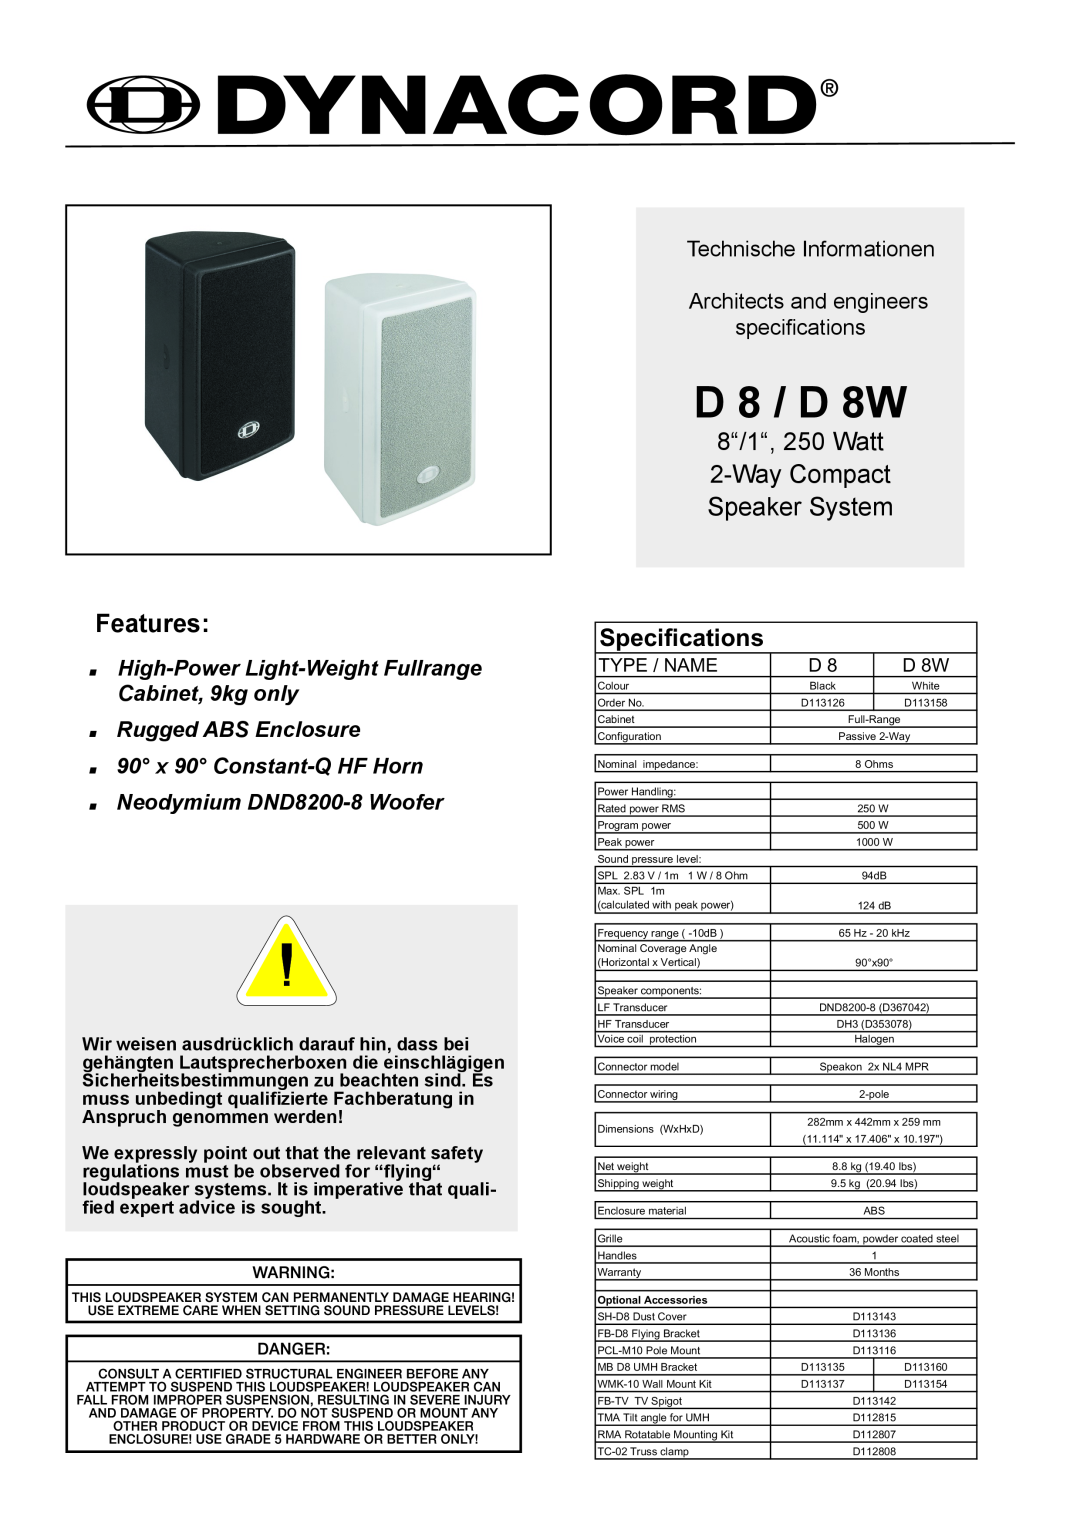 Dynacord specifications Features, D 8 / D 8W, 8“/1“, 250 Watt 2-WayCompact Speaker System, Specifications, Type / Name 